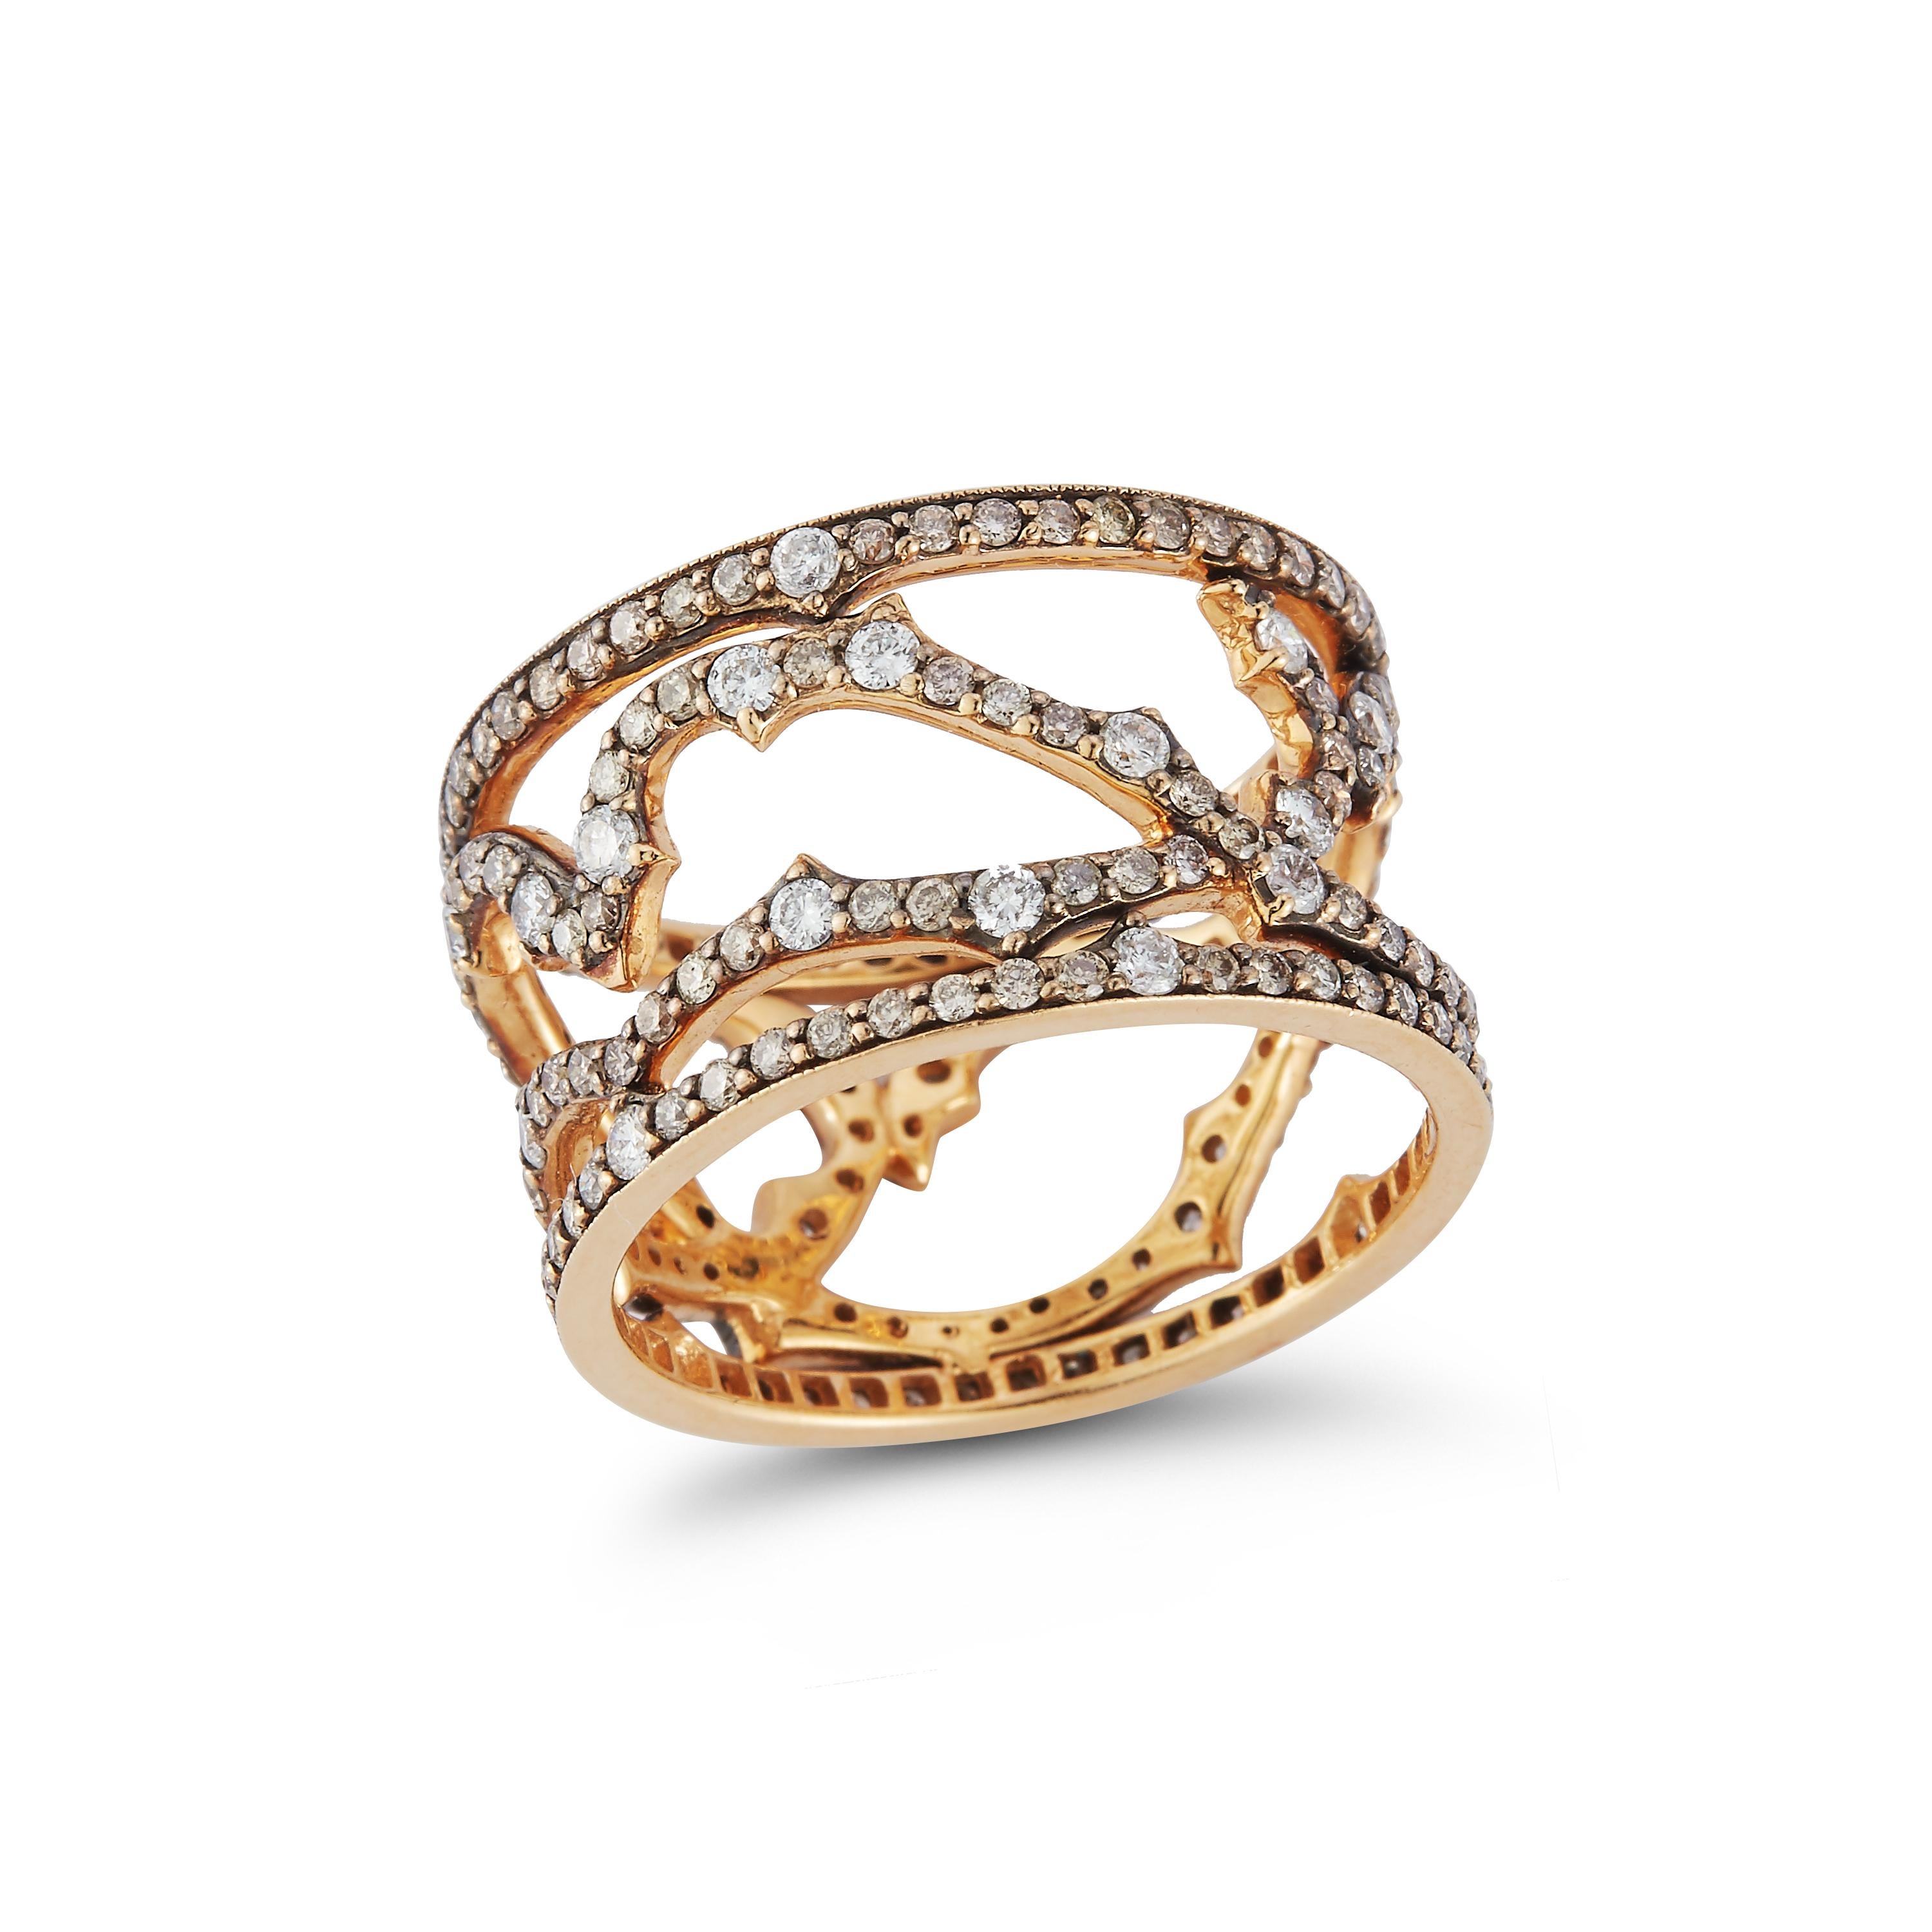 Parulina Couture Fine Jewelry- Ivy Diamond Band Ring from the Briar Rose Collection. This whimsical ring features 1.66ct of Diamonds set in 14K Yellow Gold.
Ring size 6.5

Metal: 14K Yellow Gold
Diamond Carat Weight: 1.66ct